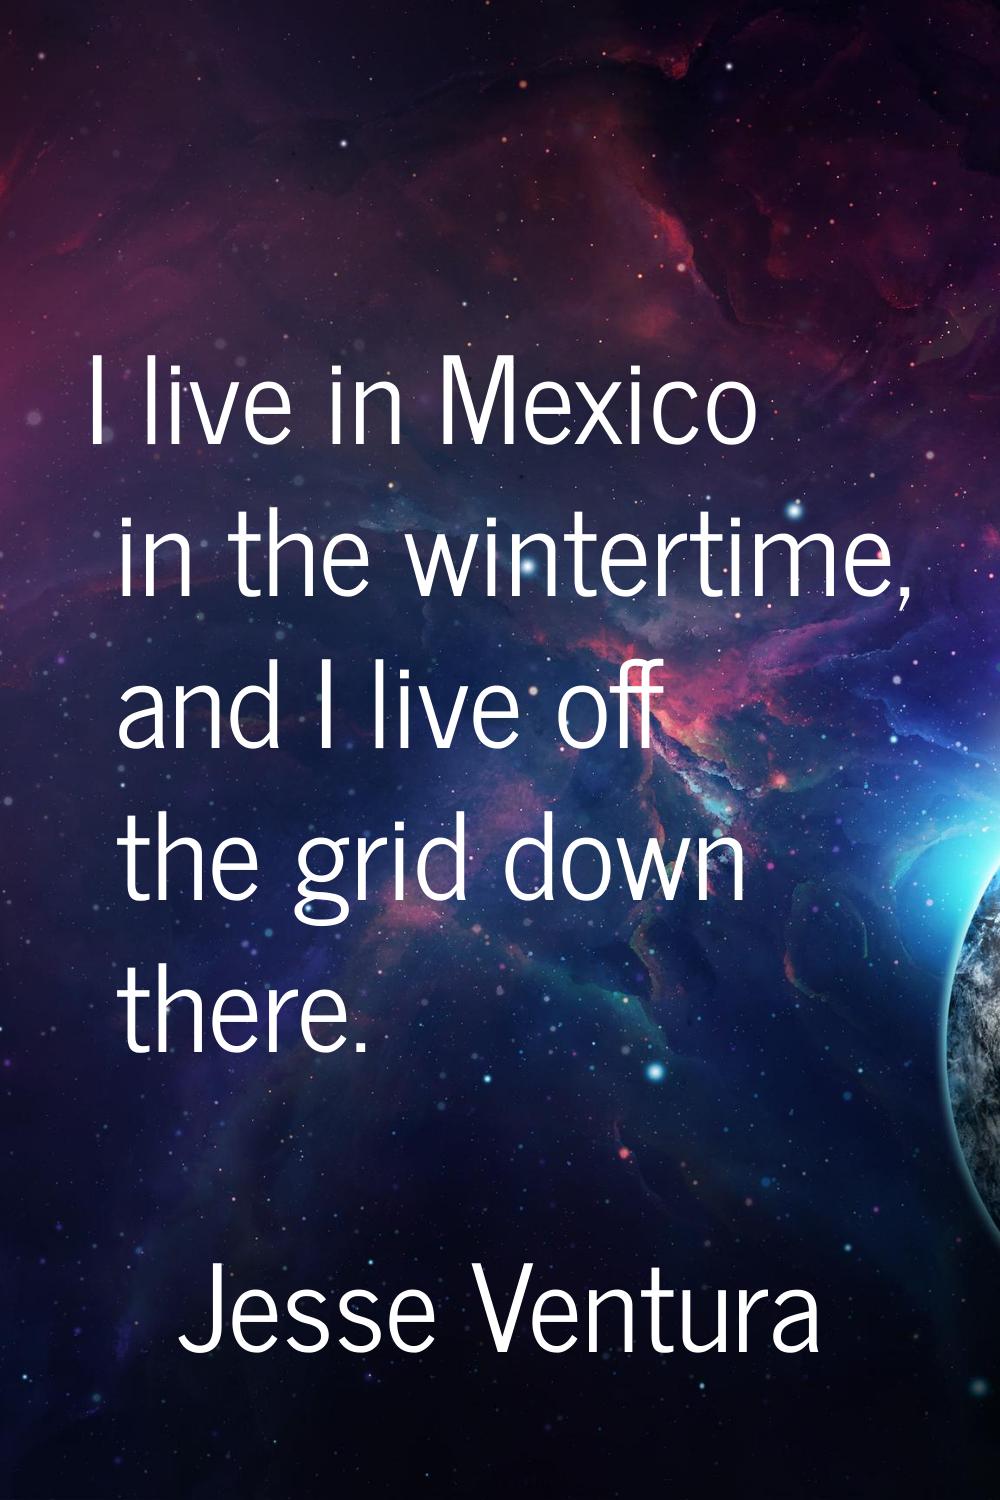 I live in Mexico in the wintertime, and I live off the grid down there.